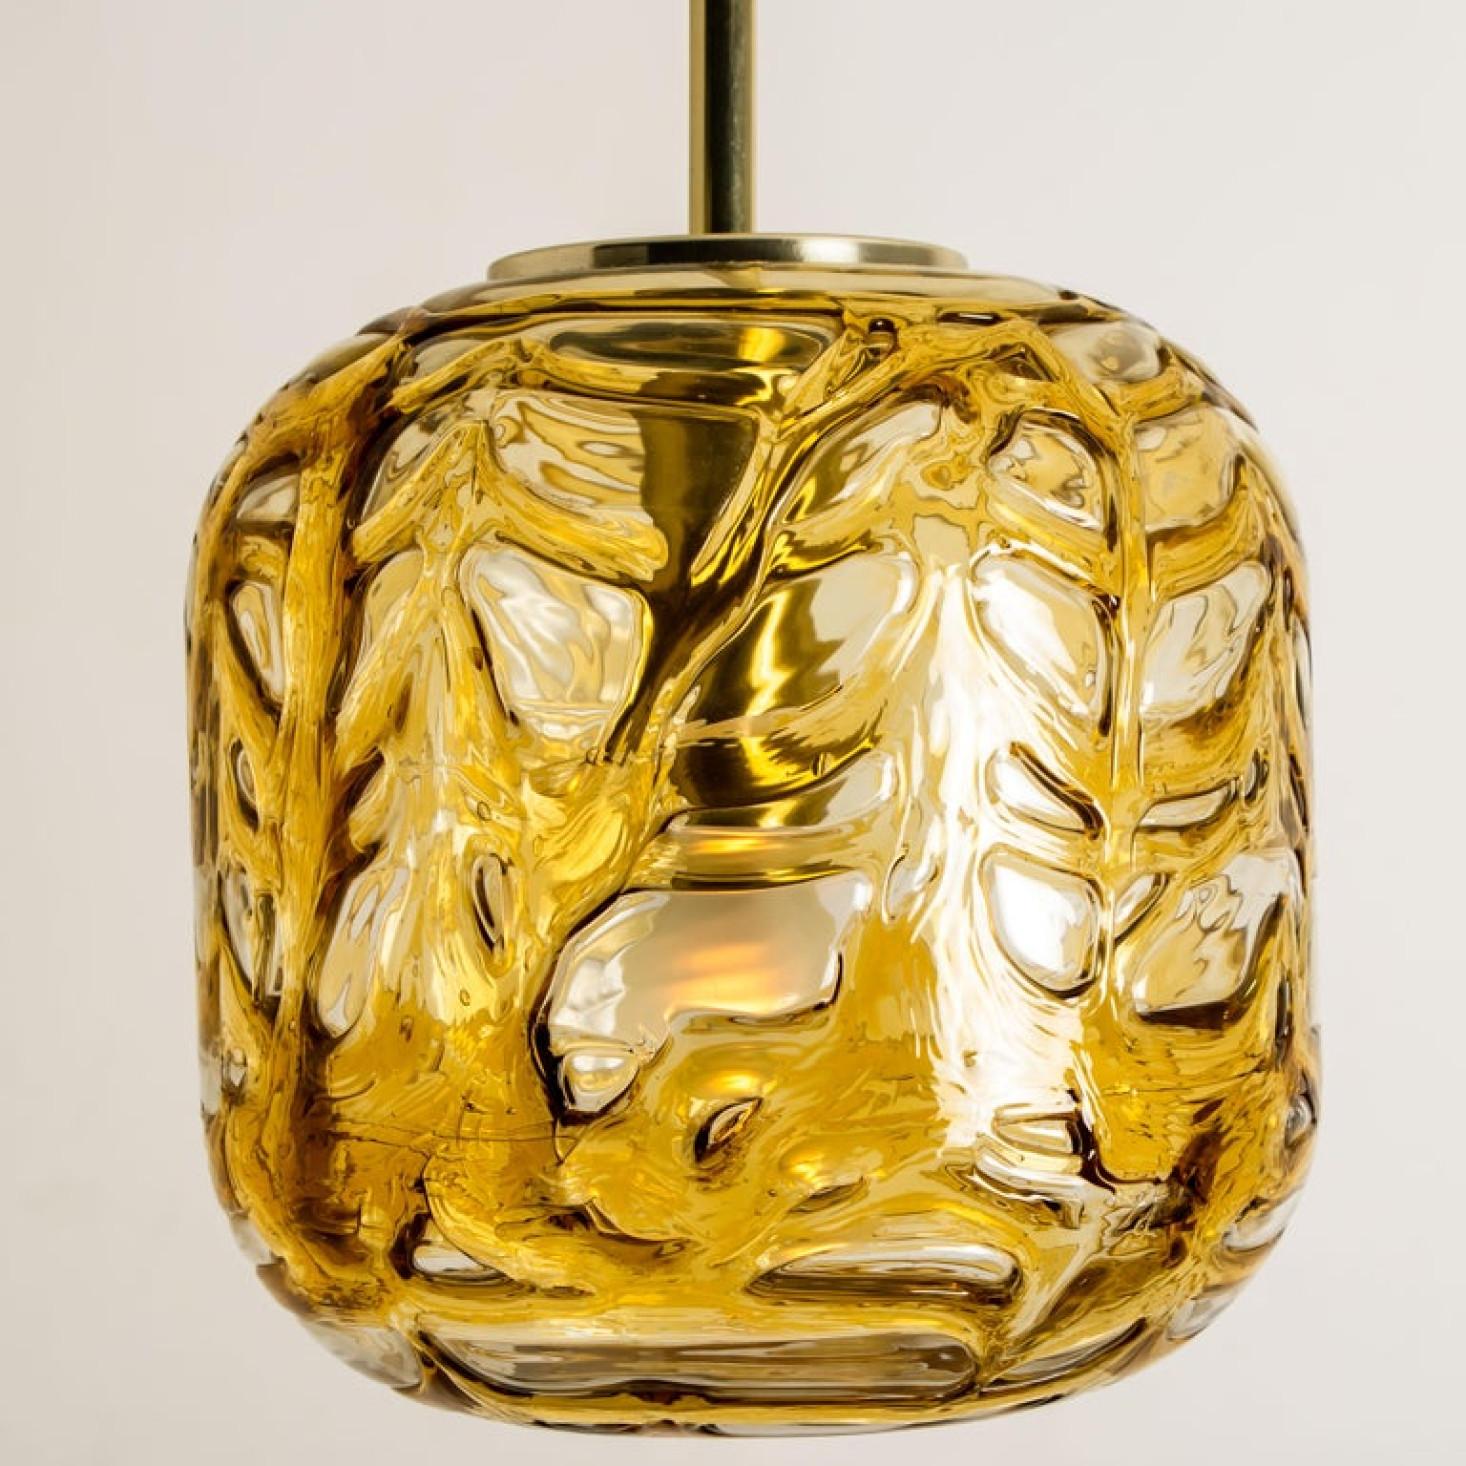 German Exceptional Pair of Amber Murano Glass Pendant Lights Venini Style, 1970 For Sale